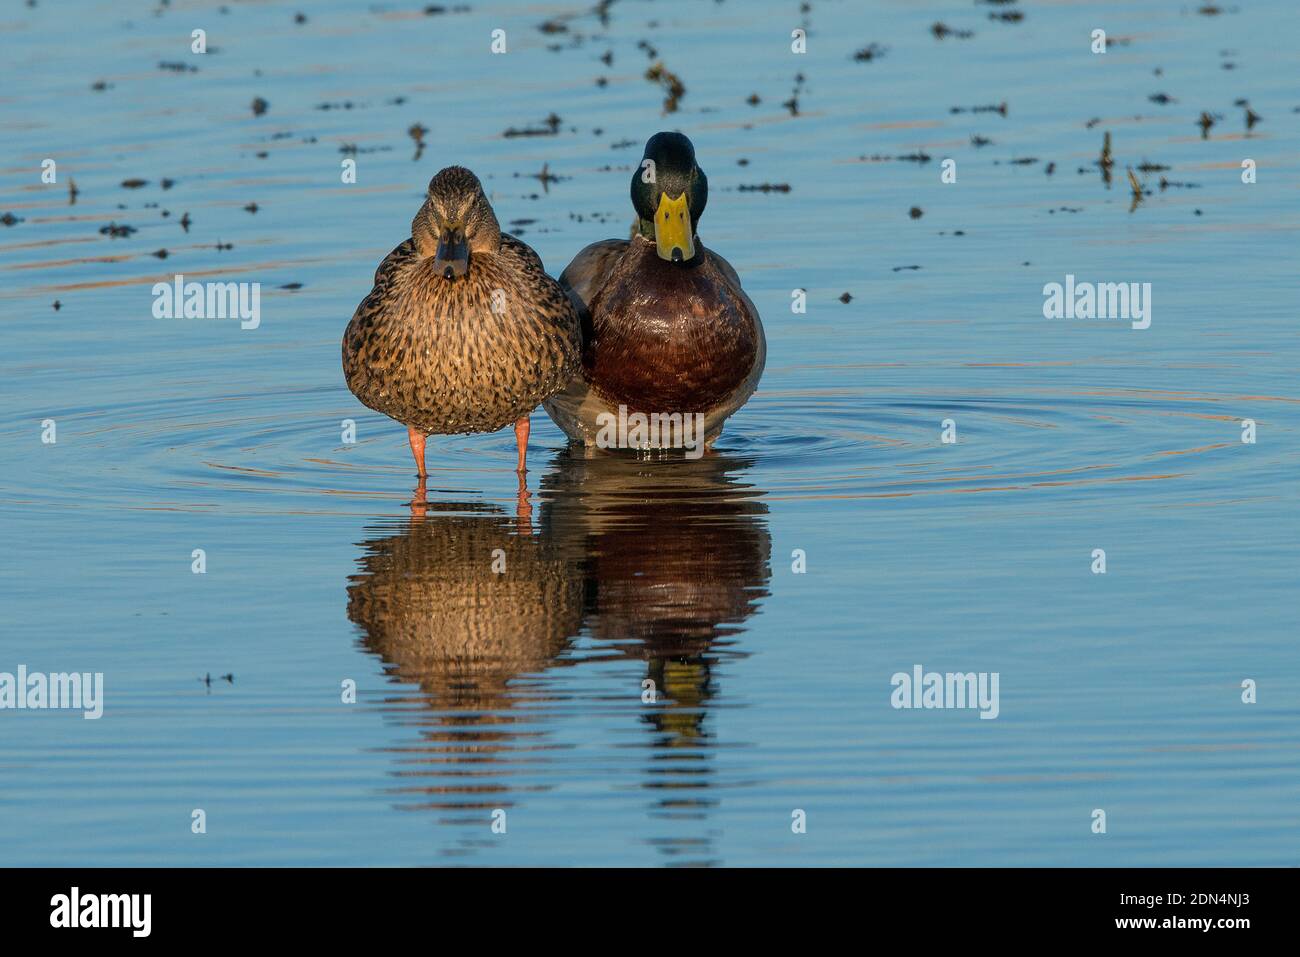 Male and female Mallards standing side by side in still clear water with both looking towards the viewer Stock Photo